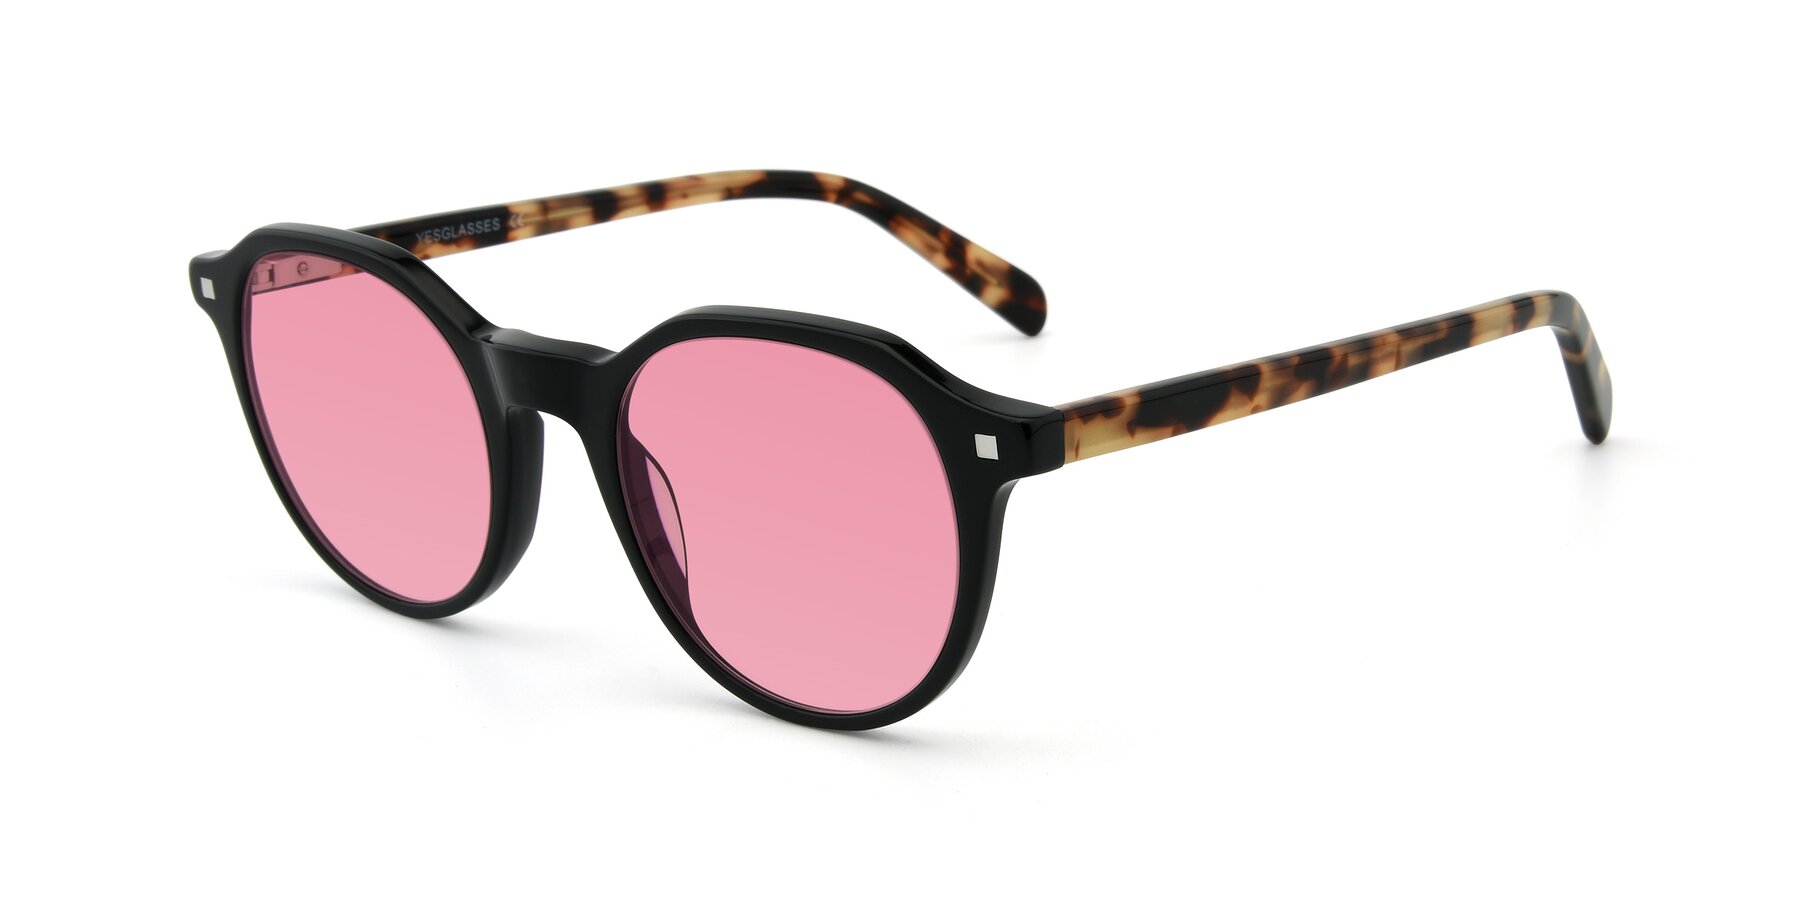 Angle of 17425 in Black with Pink Tinted Lenses